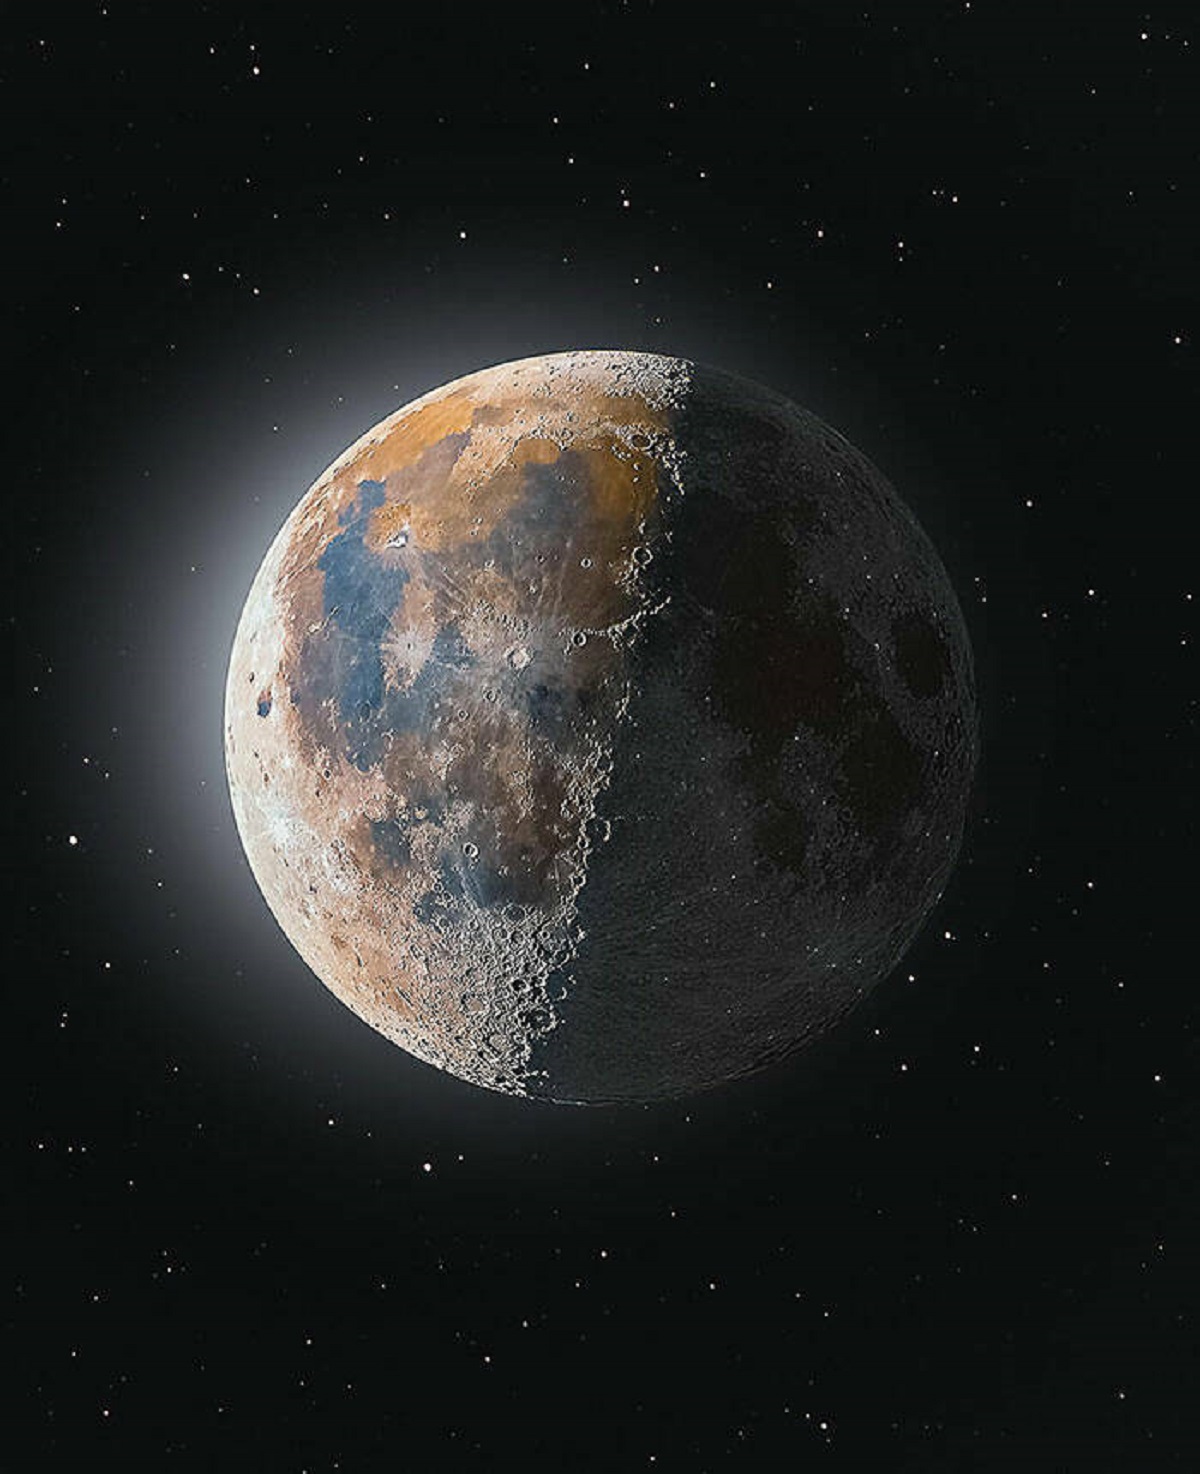 actual picture of the moon